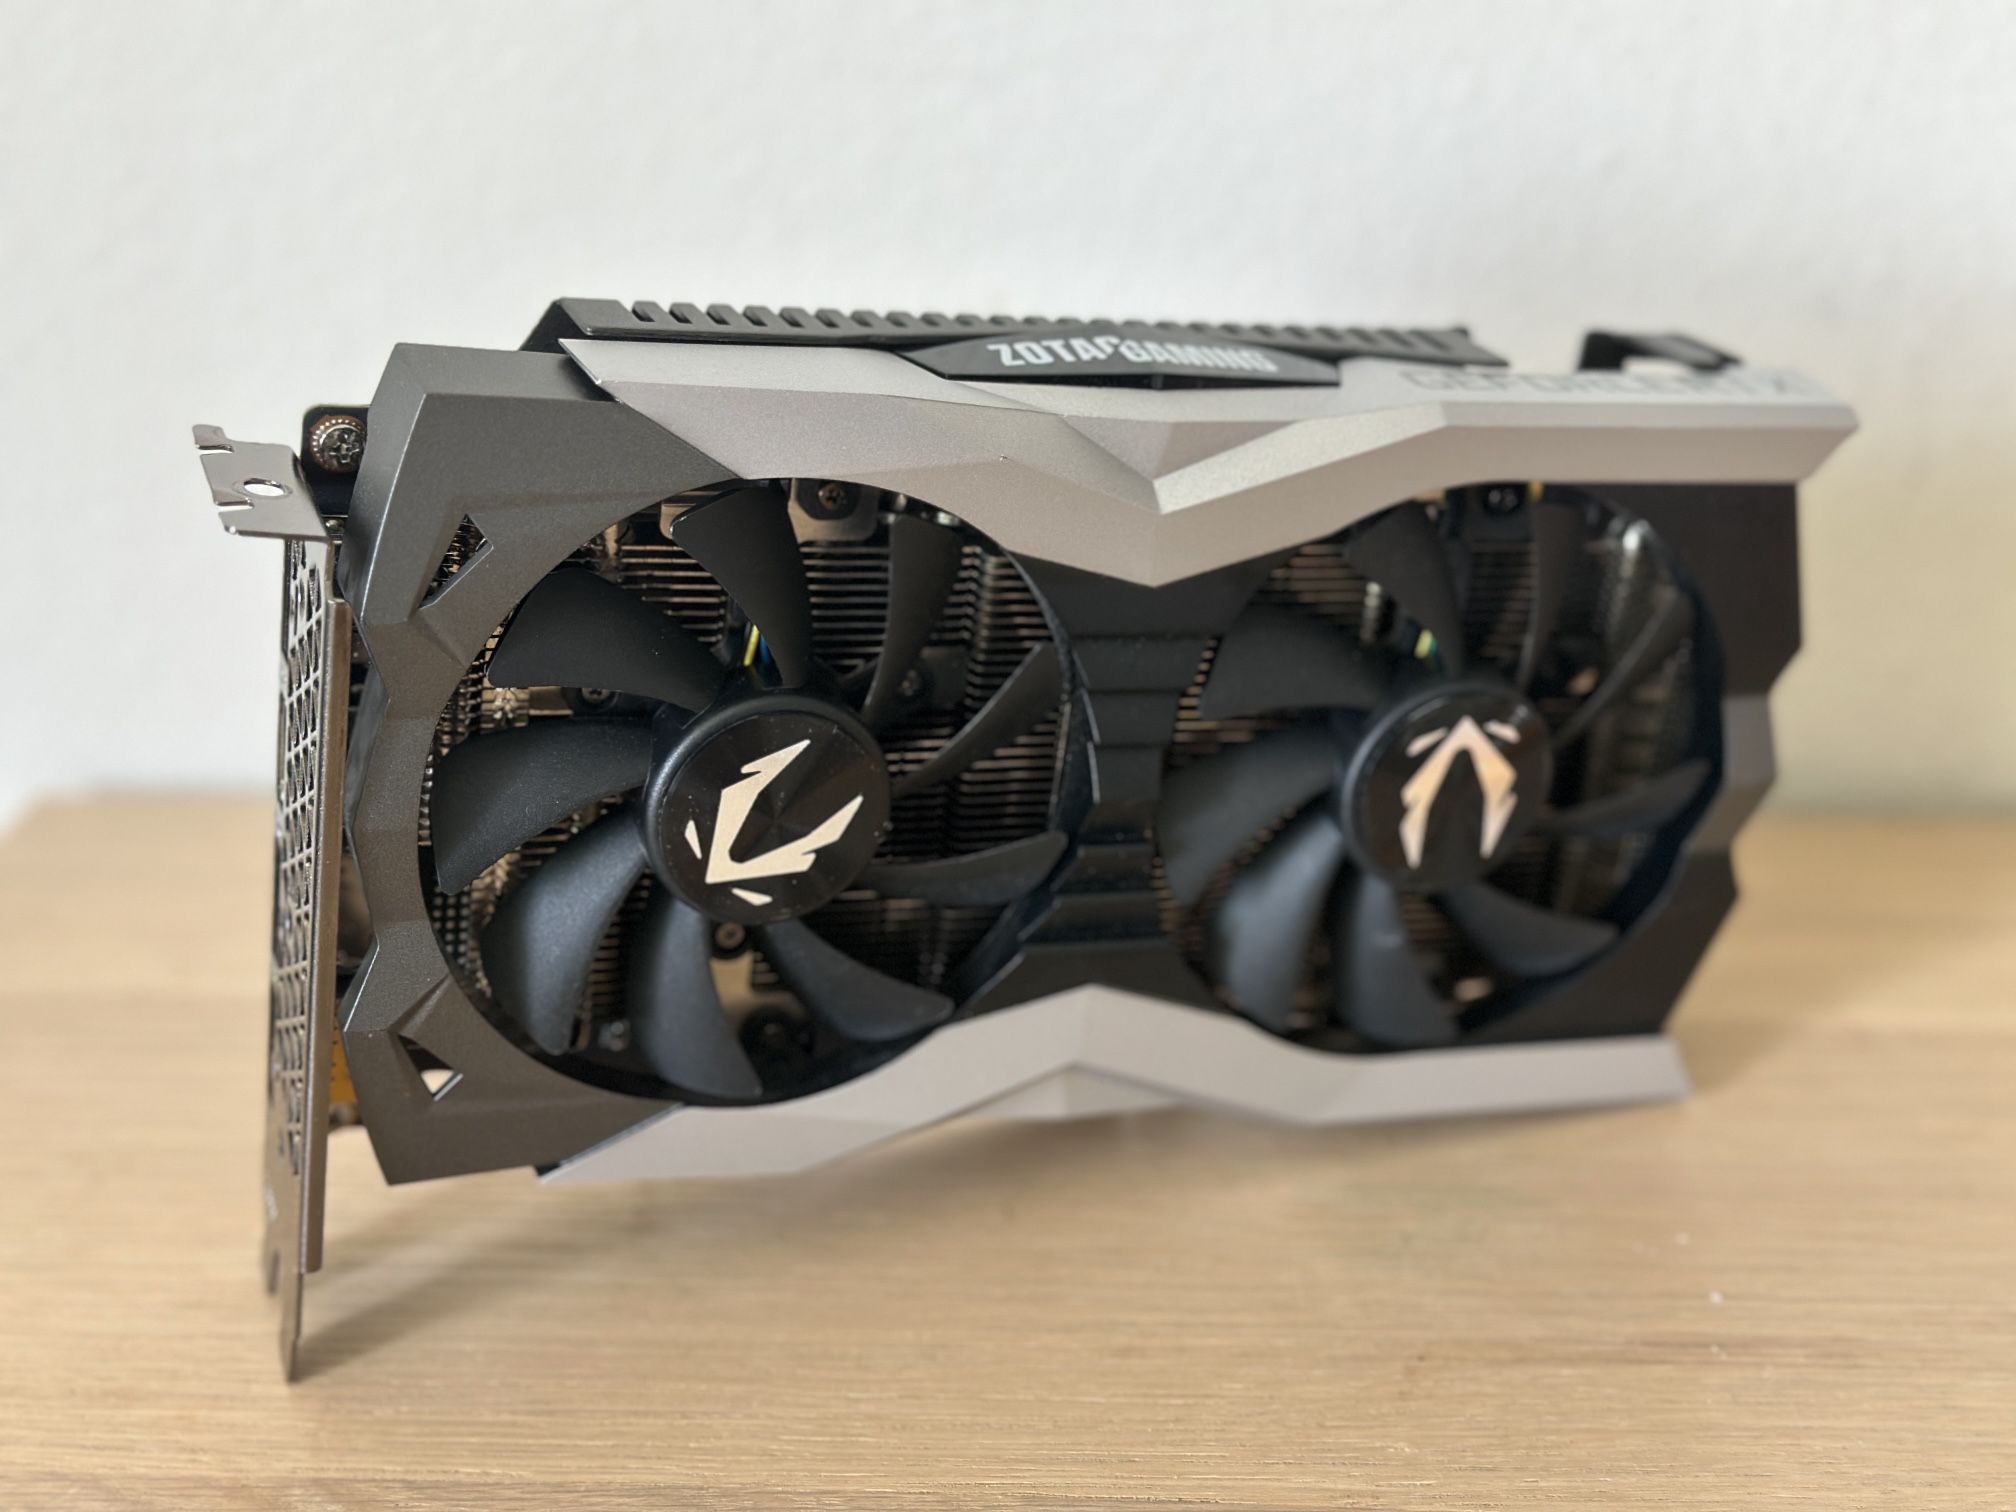 Working Perfect - 👍 Zotac Nvidia Before RTX 2060 ( 6 GB ) Graphics Card